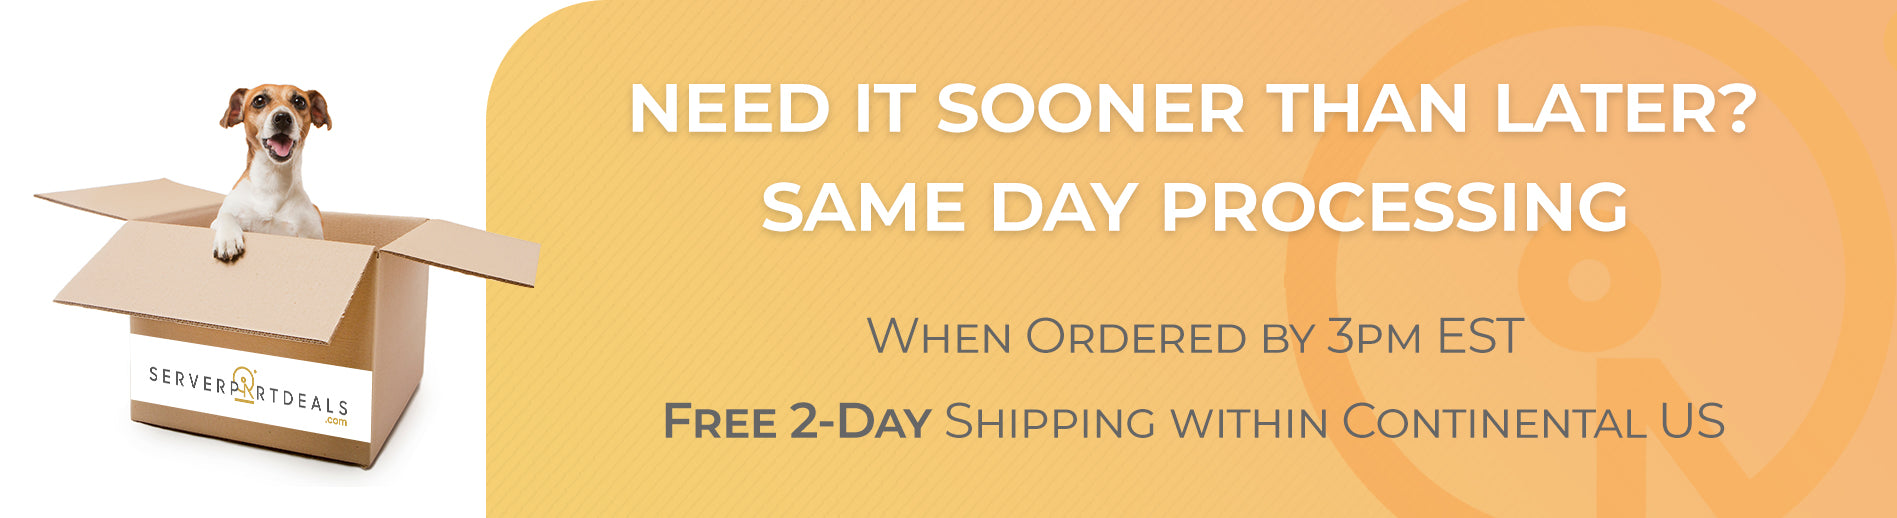 same day processing and free 2 day shipping for hard drives and solid state drives for managed service providers and system integrators for data center and enterprise business